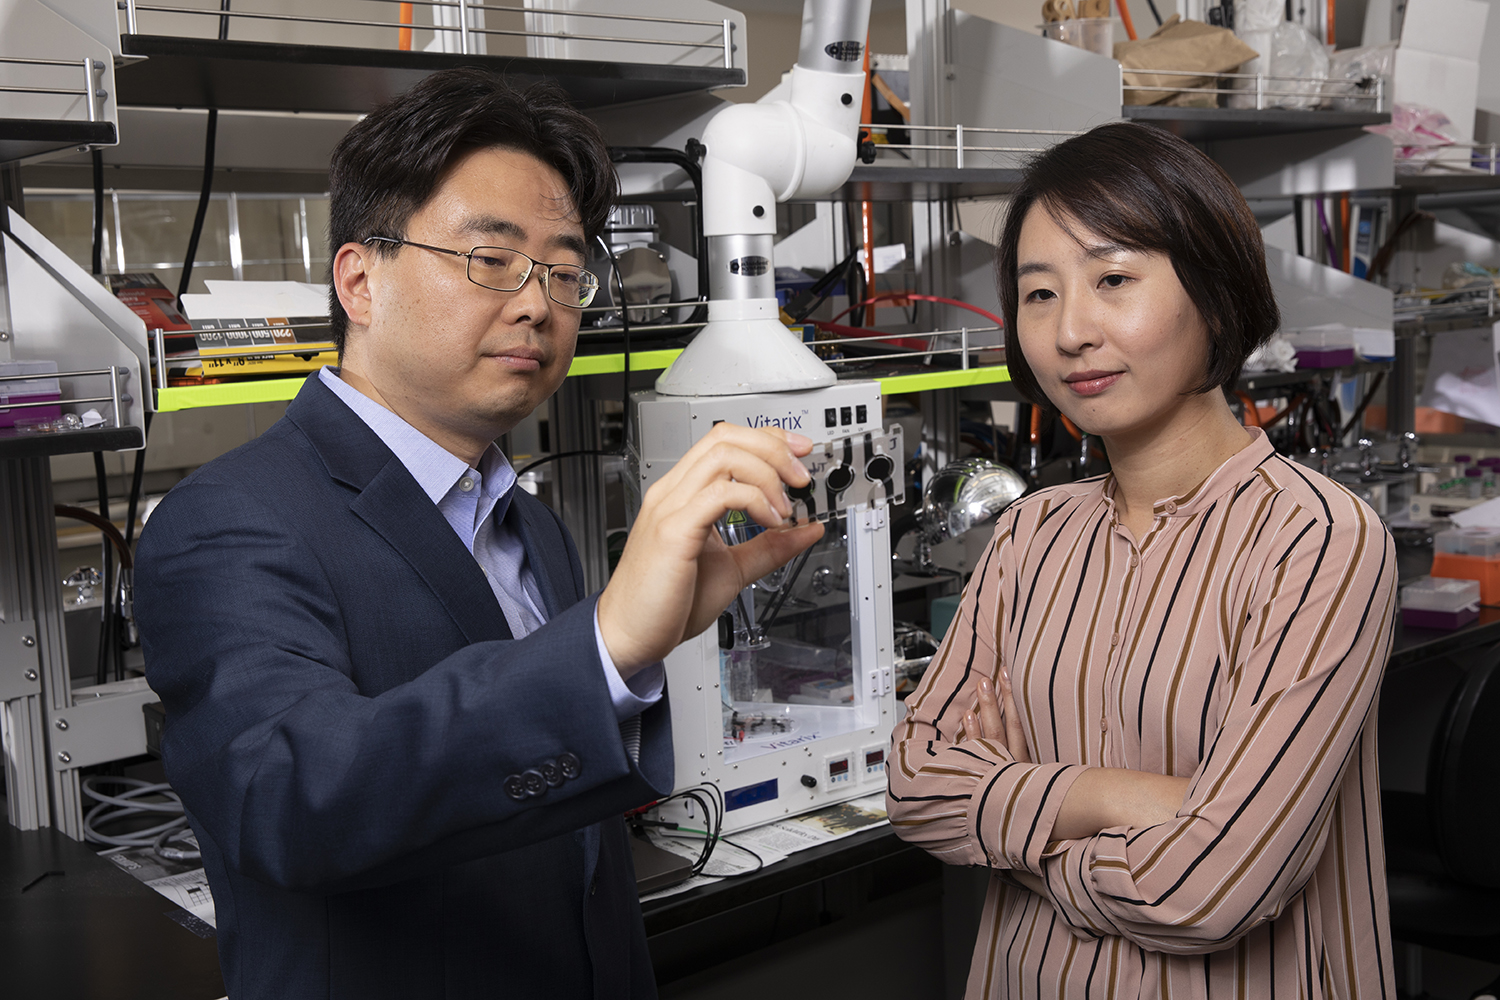 Seokheun (Sean) Choi, associate professor of electrical and computer engineering and Ahyeon Koh, assistant professor of biomedical engineering, work at Choi's lab at the Engineering and Science Building in the Innovative Technologies Complex at Binghamton University's Watson School of Engineering and Applied Science.